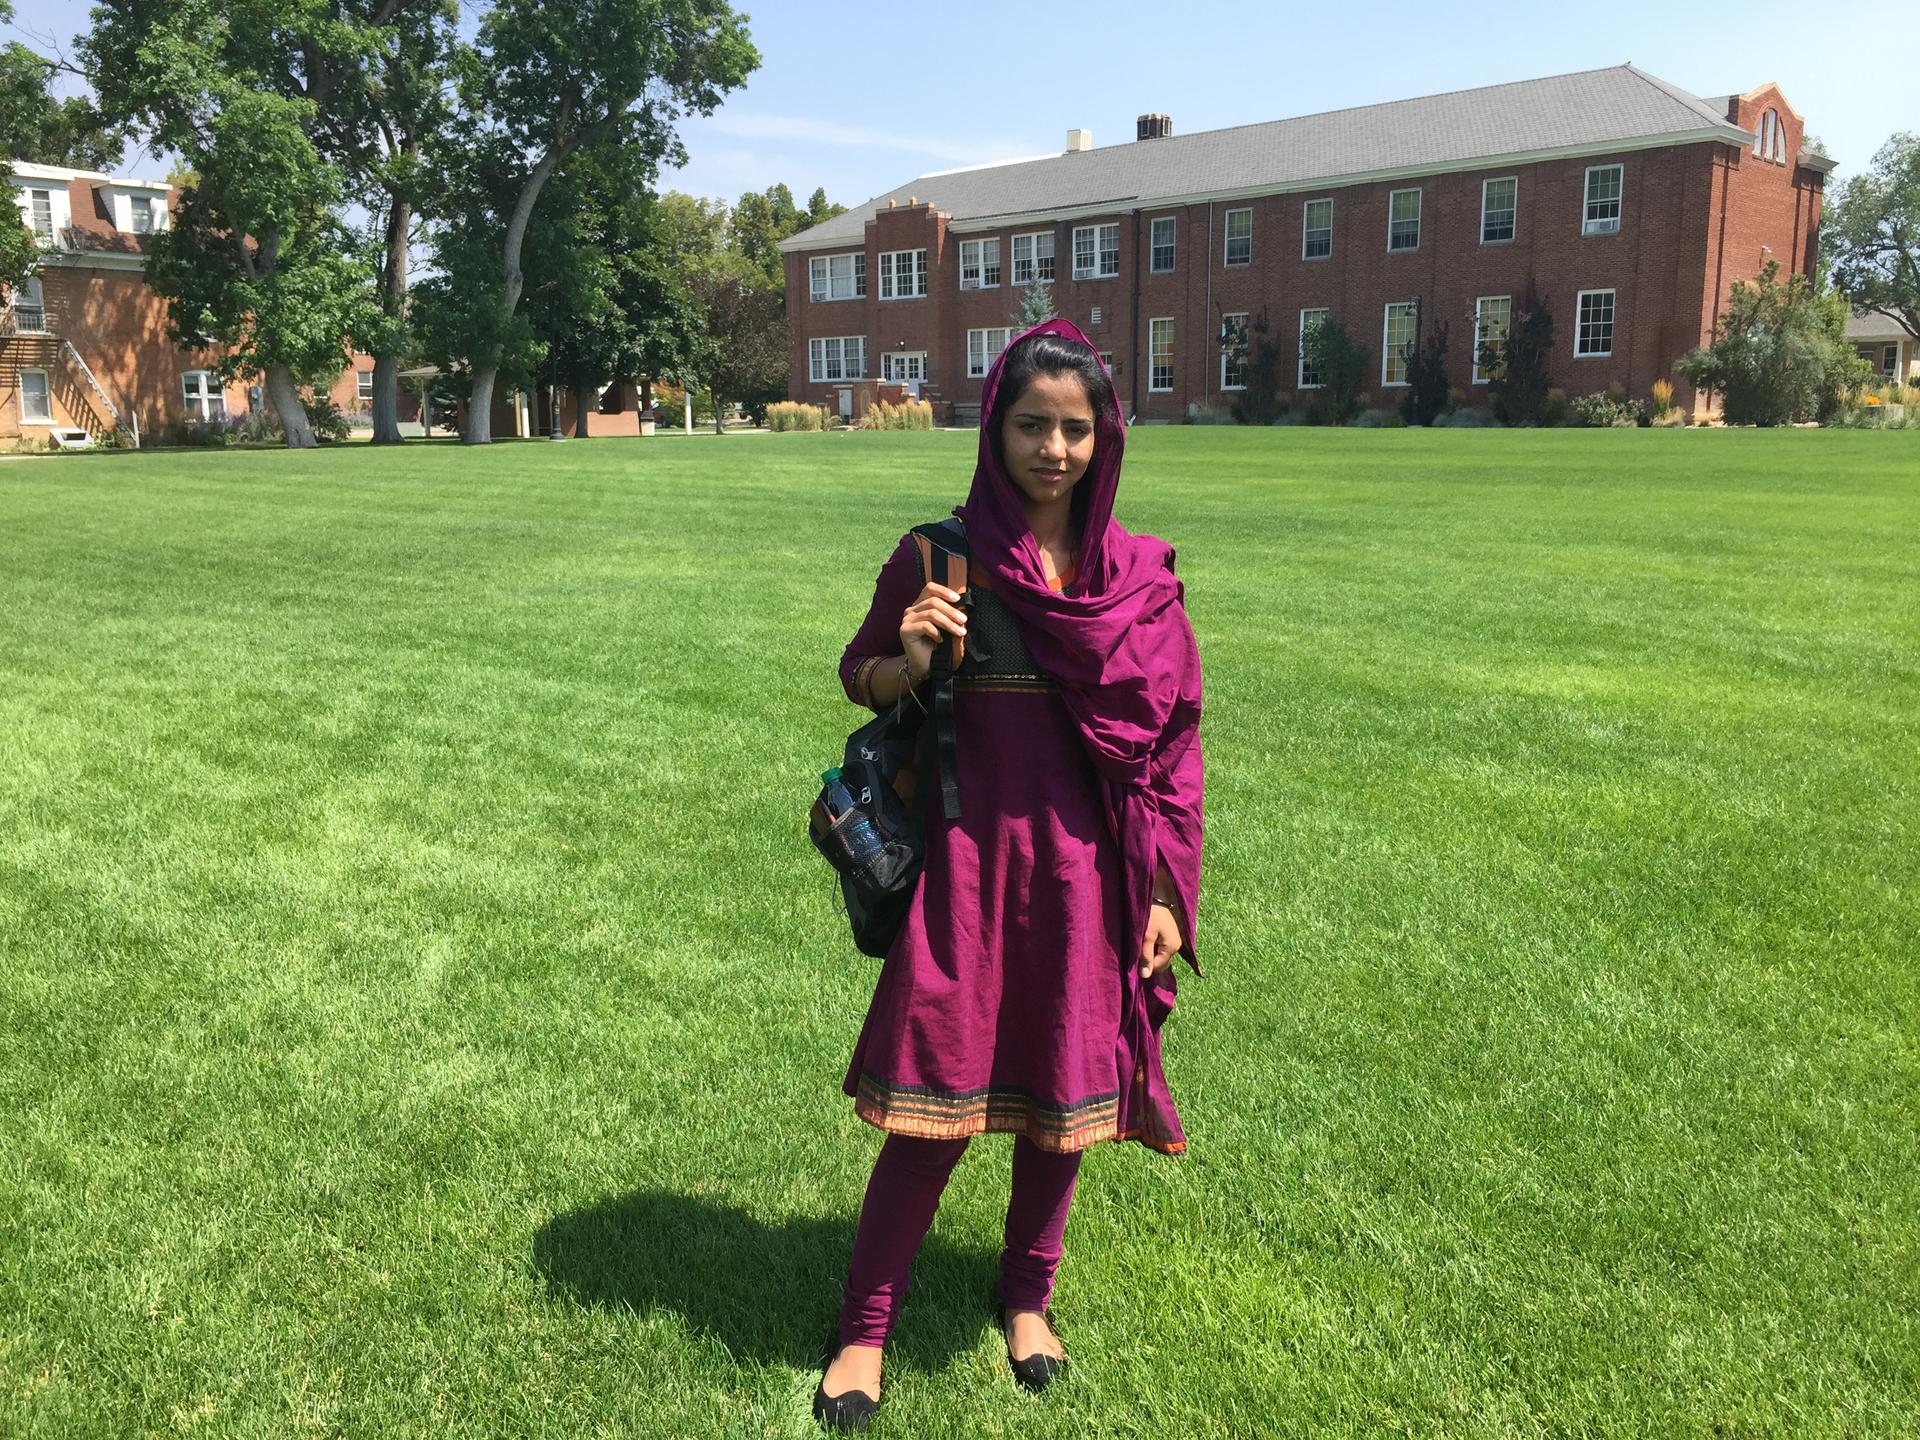 Born in Afghanistan, Sonita Alizadeh got a full scholarship to go to Wasatch Academy, a boarding school in the heart of Utah.